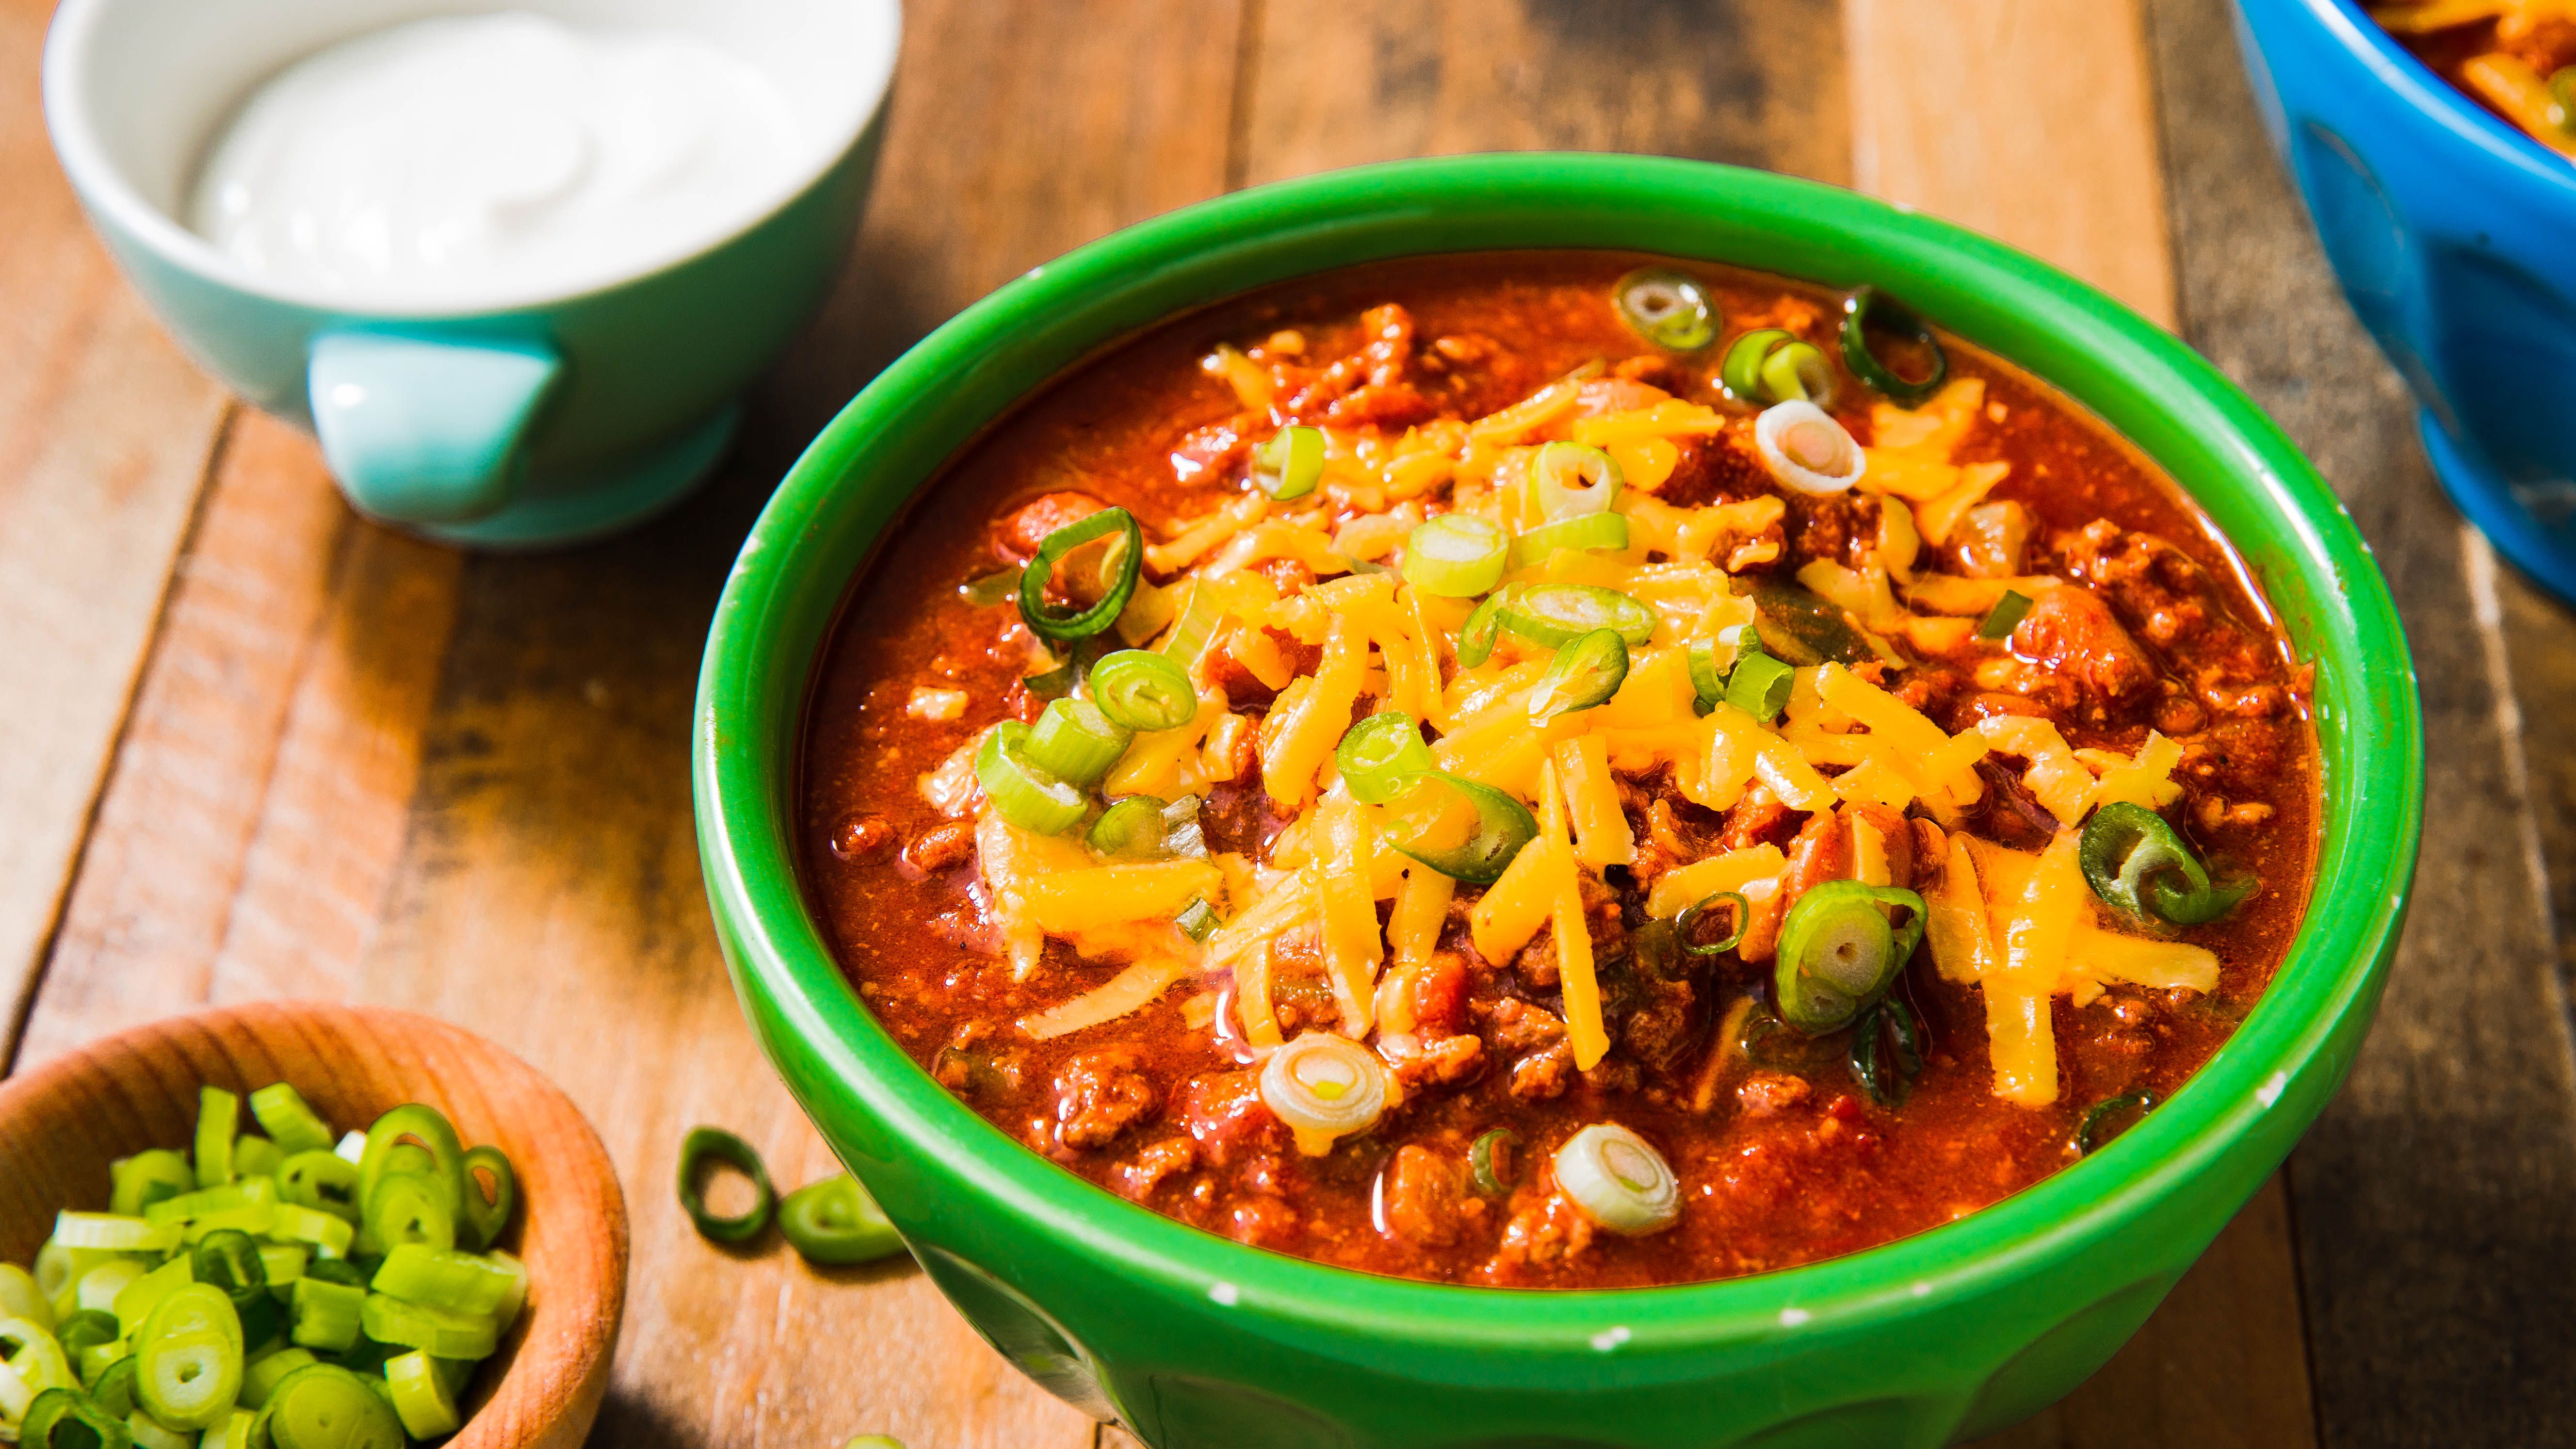 Wendy's Chili (Easy Copycat Recipe) - Better Than Wendy's!